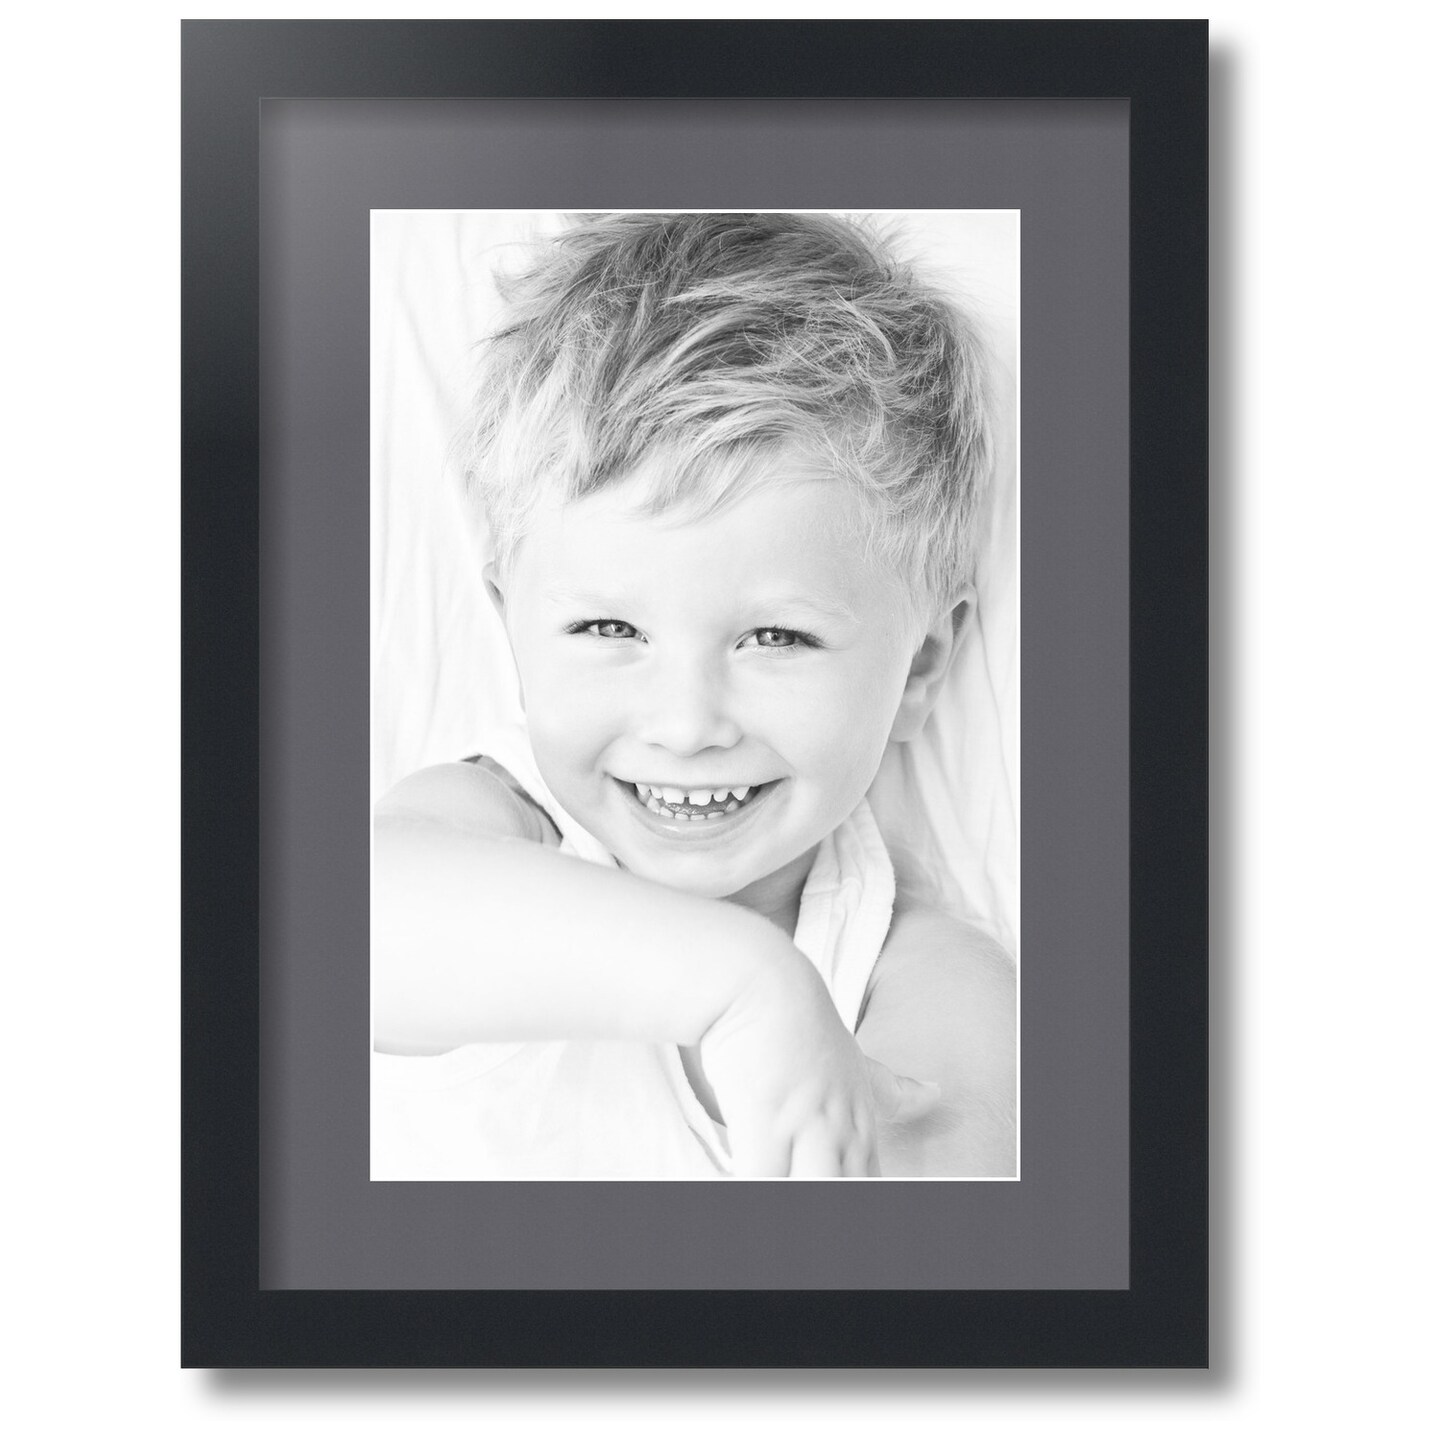 ArtToFrames Collage Photo Picture Frame with 1 - 10x15 inch Openings, Framed in Black with Over 62 Mat Color Options and Regular Glass (CSM-3926-1402)